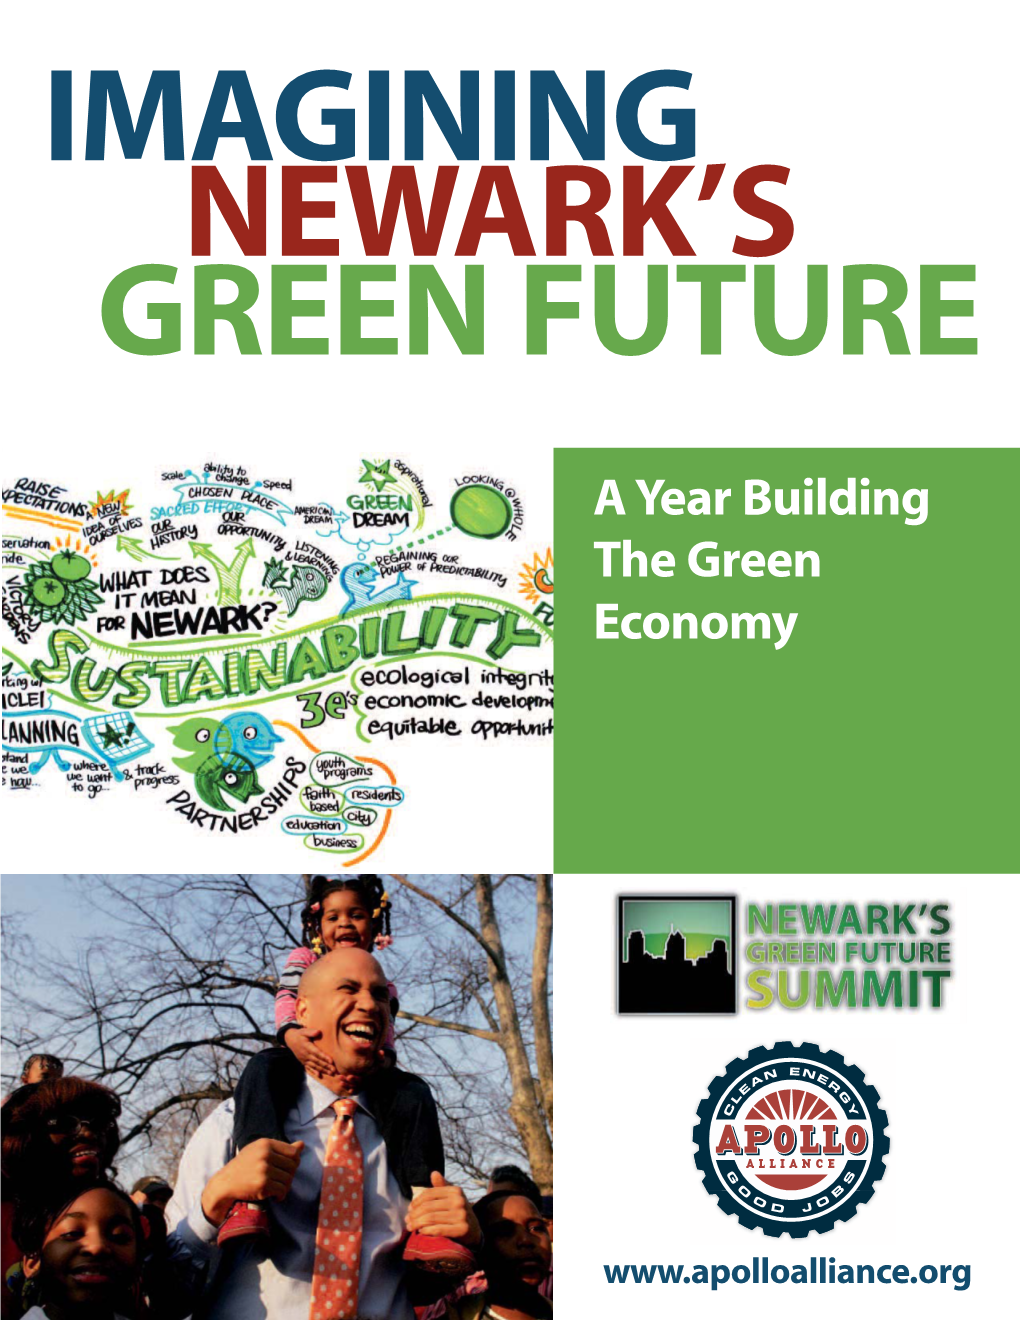 A Year Building the Green Economy